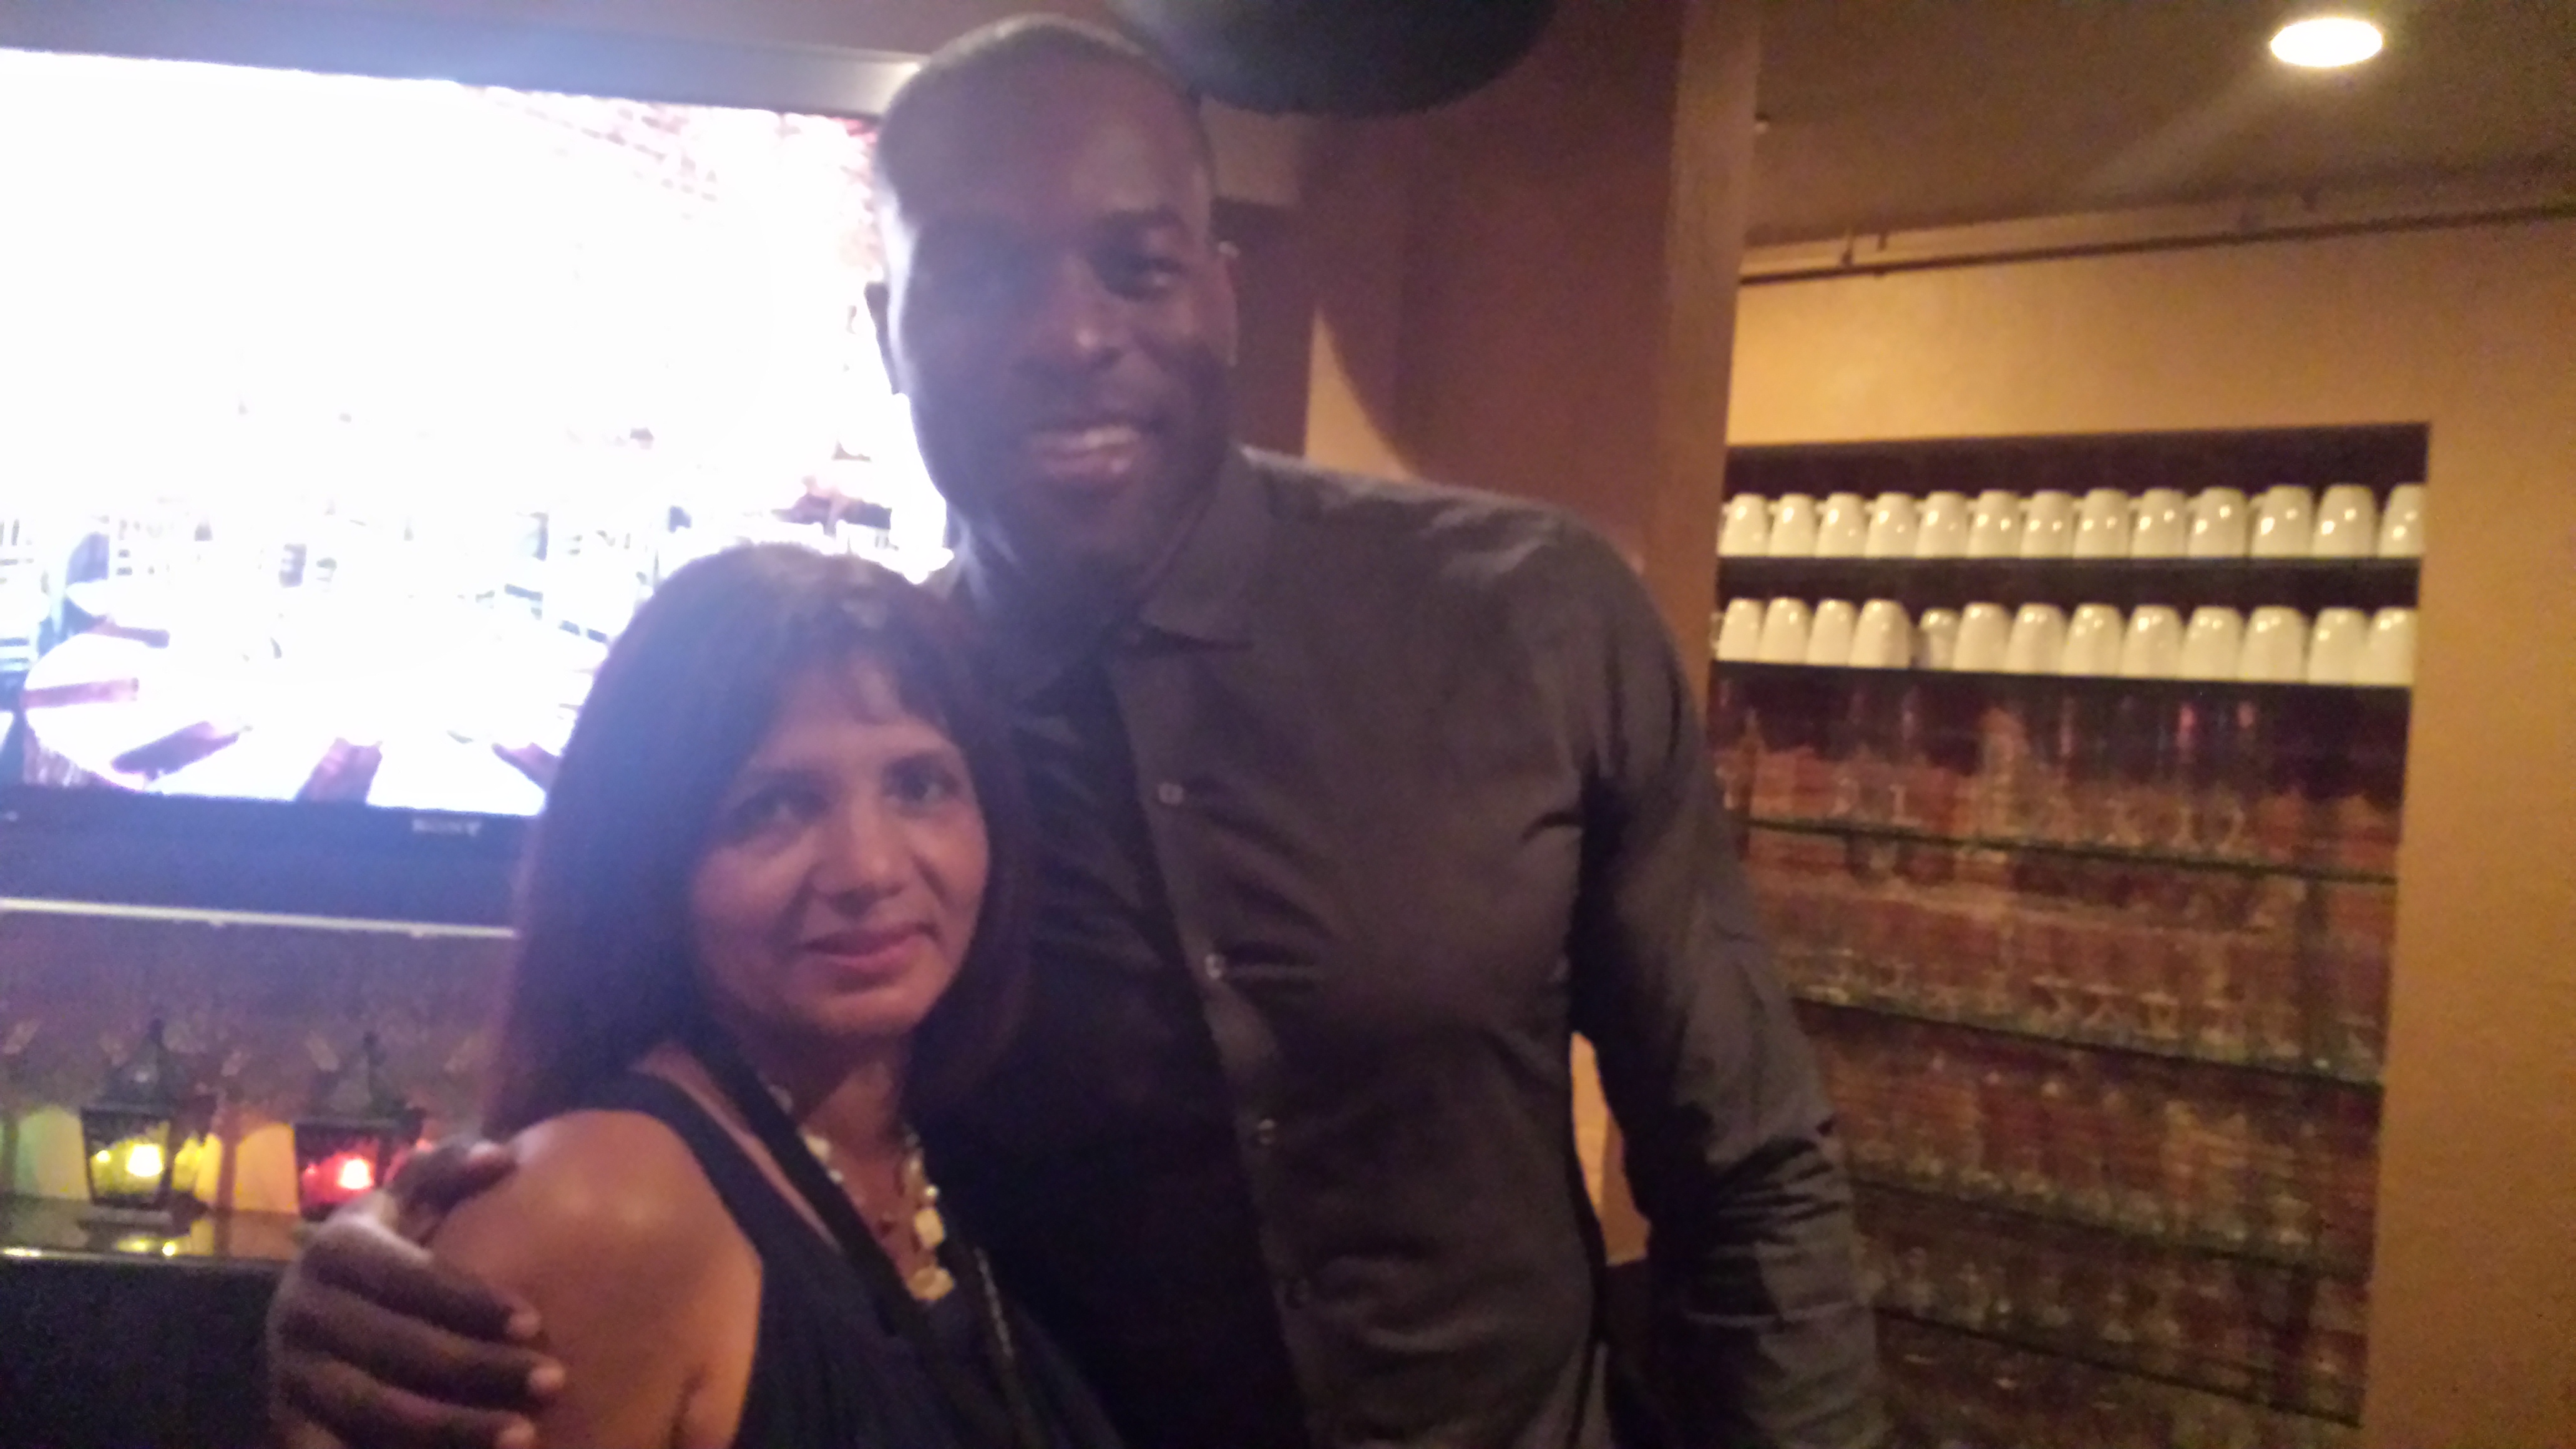 At Premiere for 'Unsullied' with the Director Simeon Rice of football fame. Great film, Aug 22 in FL. Wonderful time and all were so courteous and fun.